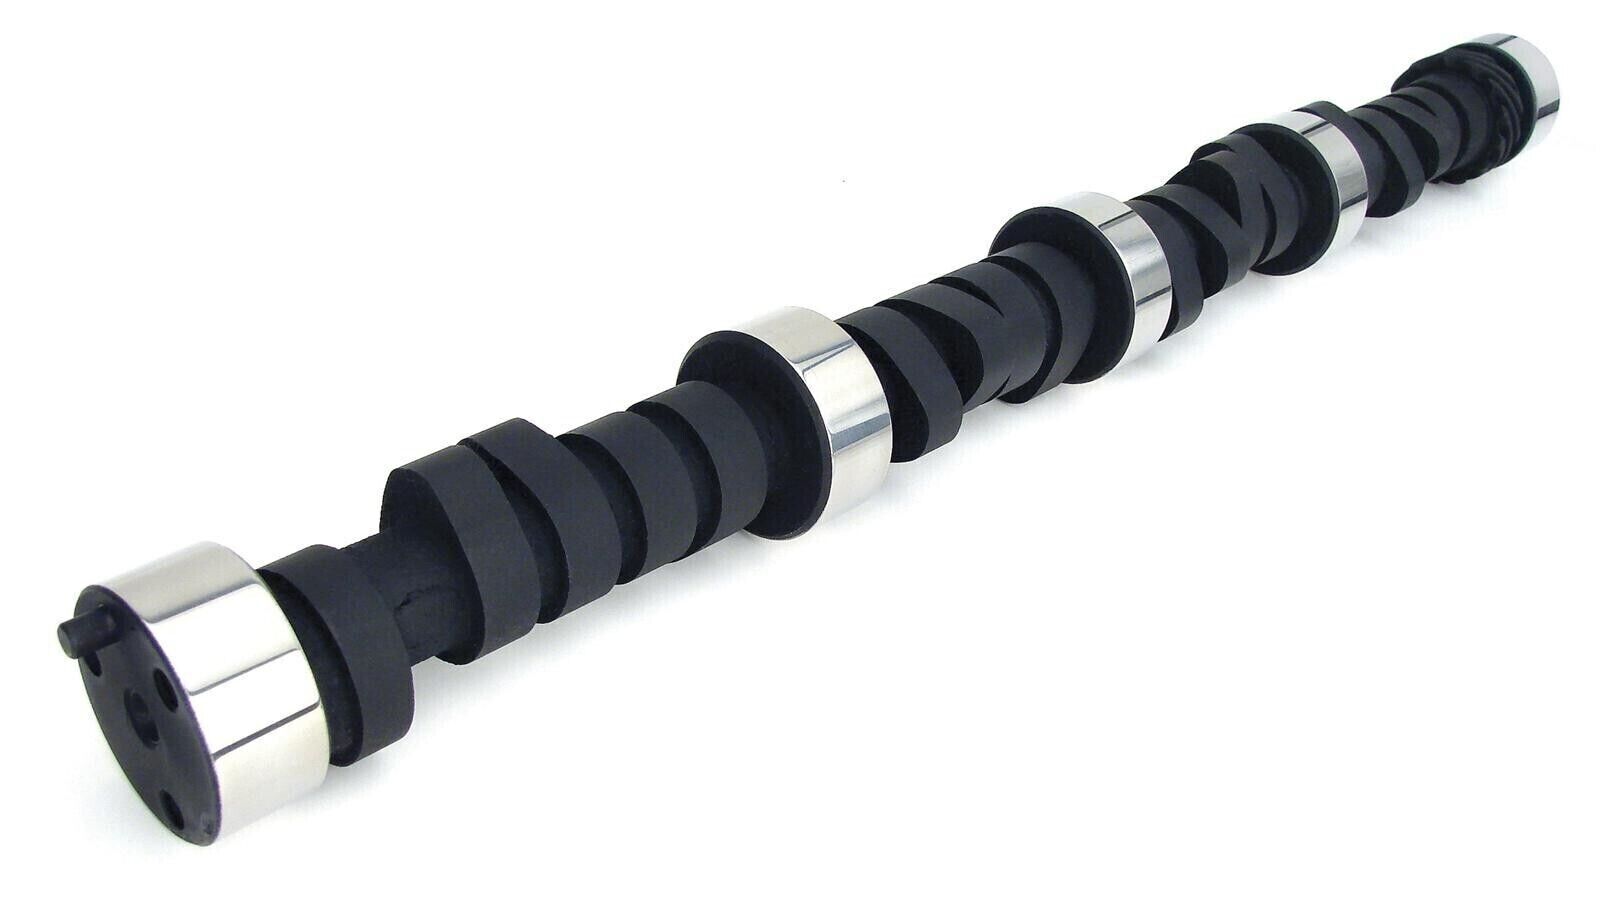 COMP Cams High Energy Camshaft Ford 351 Cleveland # CC32-219-3